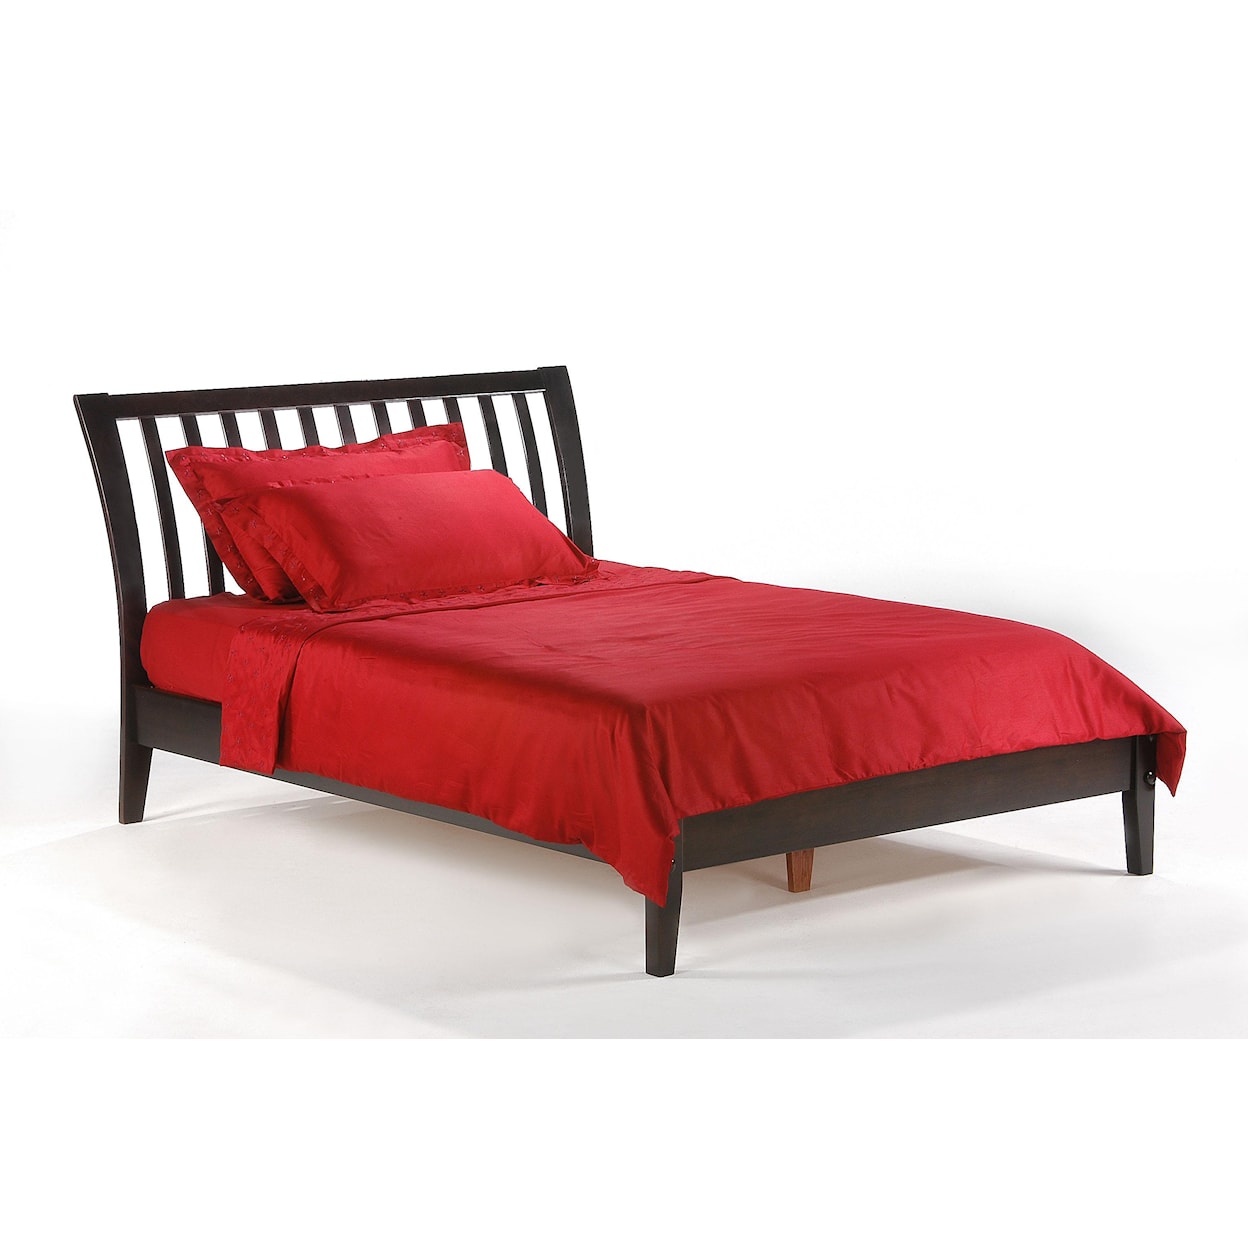 Night & Day Furniture Spice Full Bed